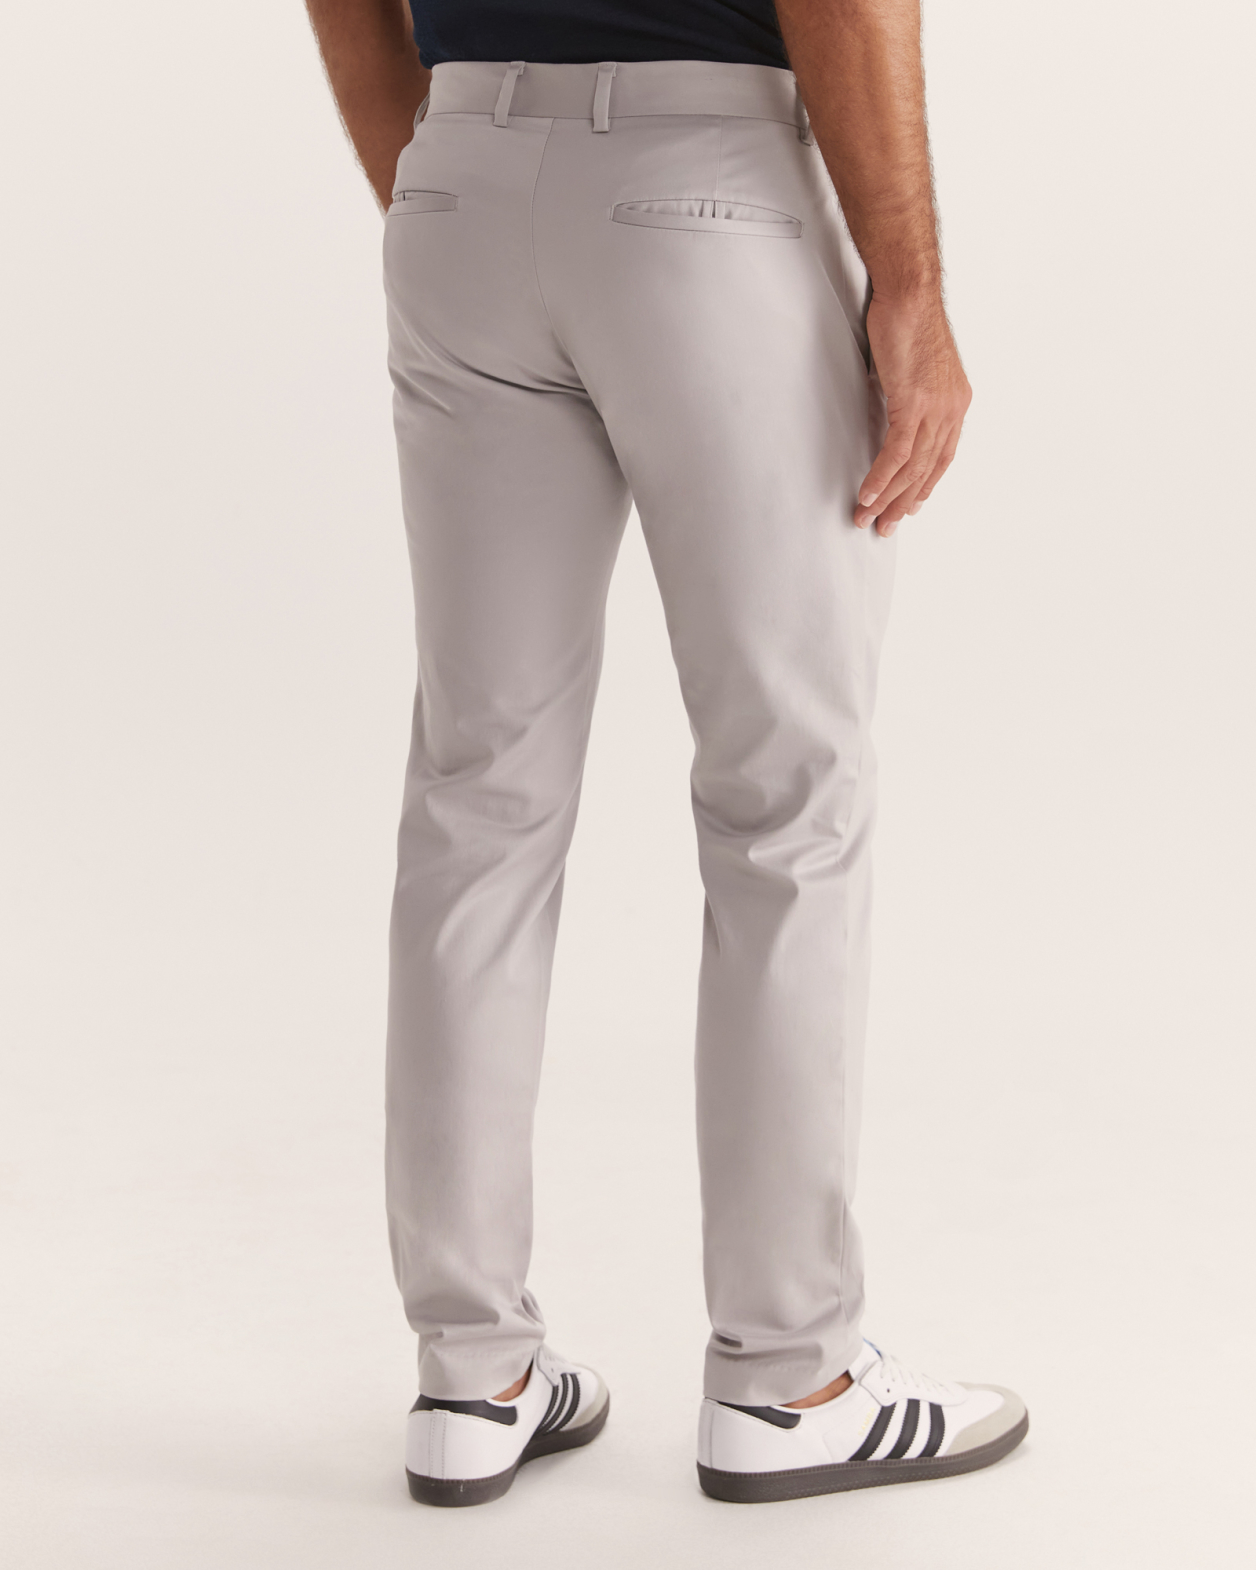 Baxter Slim Chino Pant in MISTY GREY